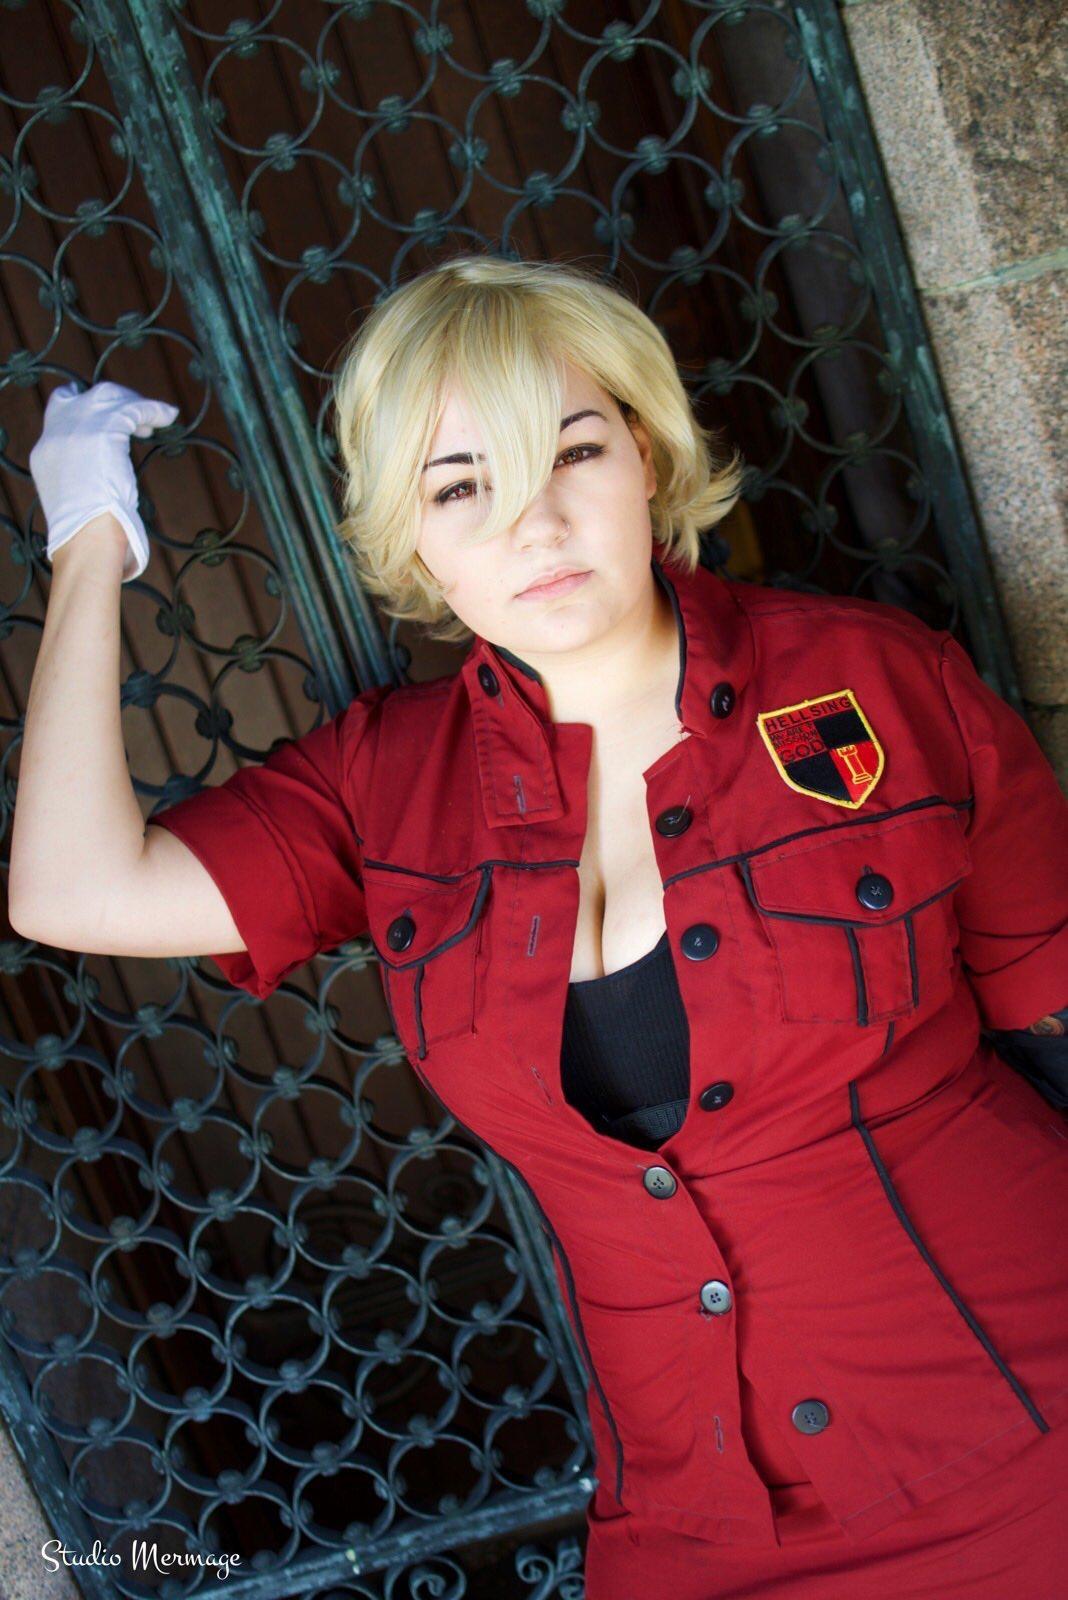 Seras Victoria From Hellsing Ultimate By BloodintheShadows